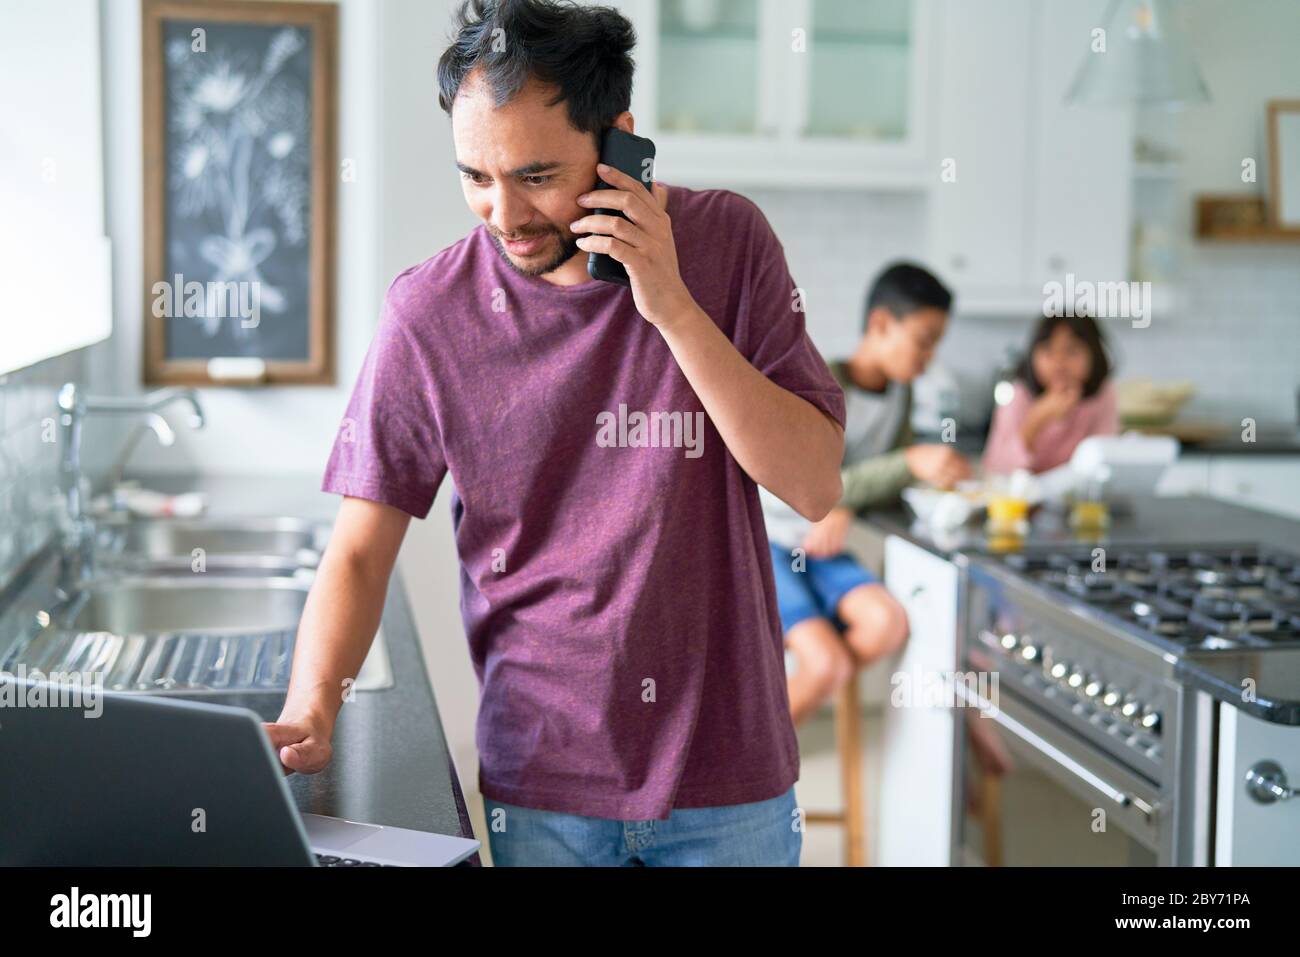 Man working at laptop in kitchen with kids Stock Photo